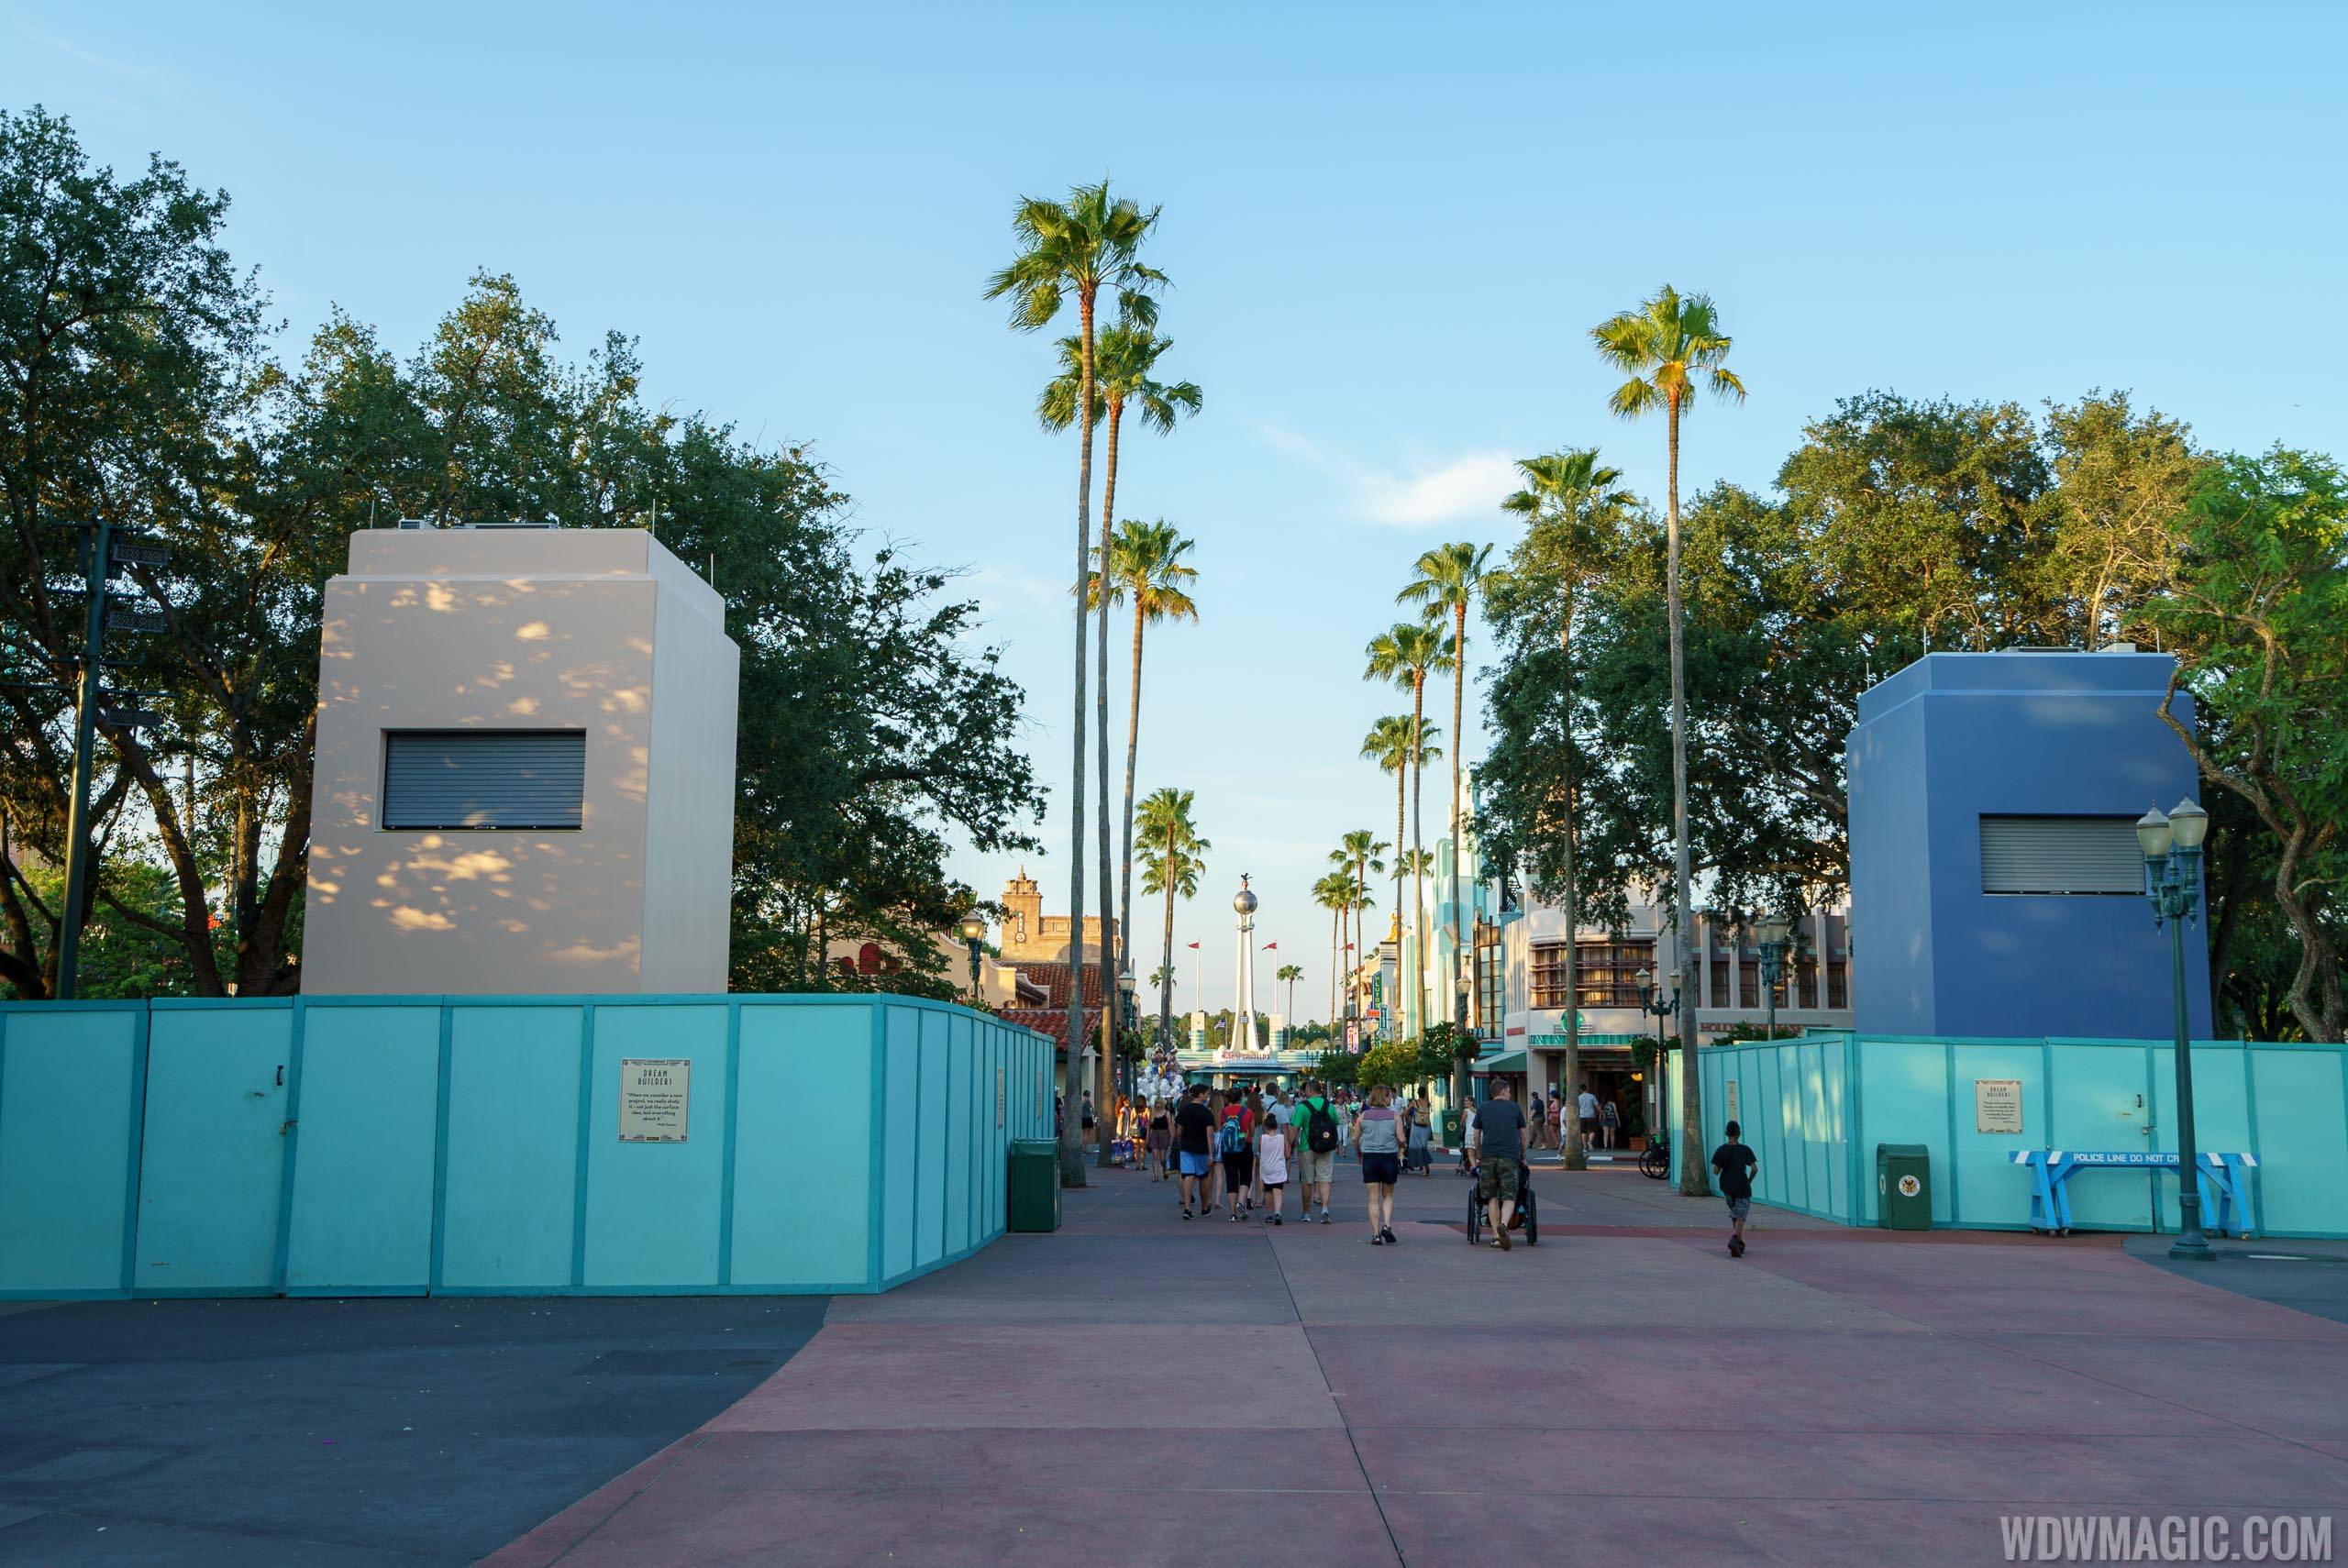 PHOTOS - Update on construction for Star Wars A Galactic Spectacular